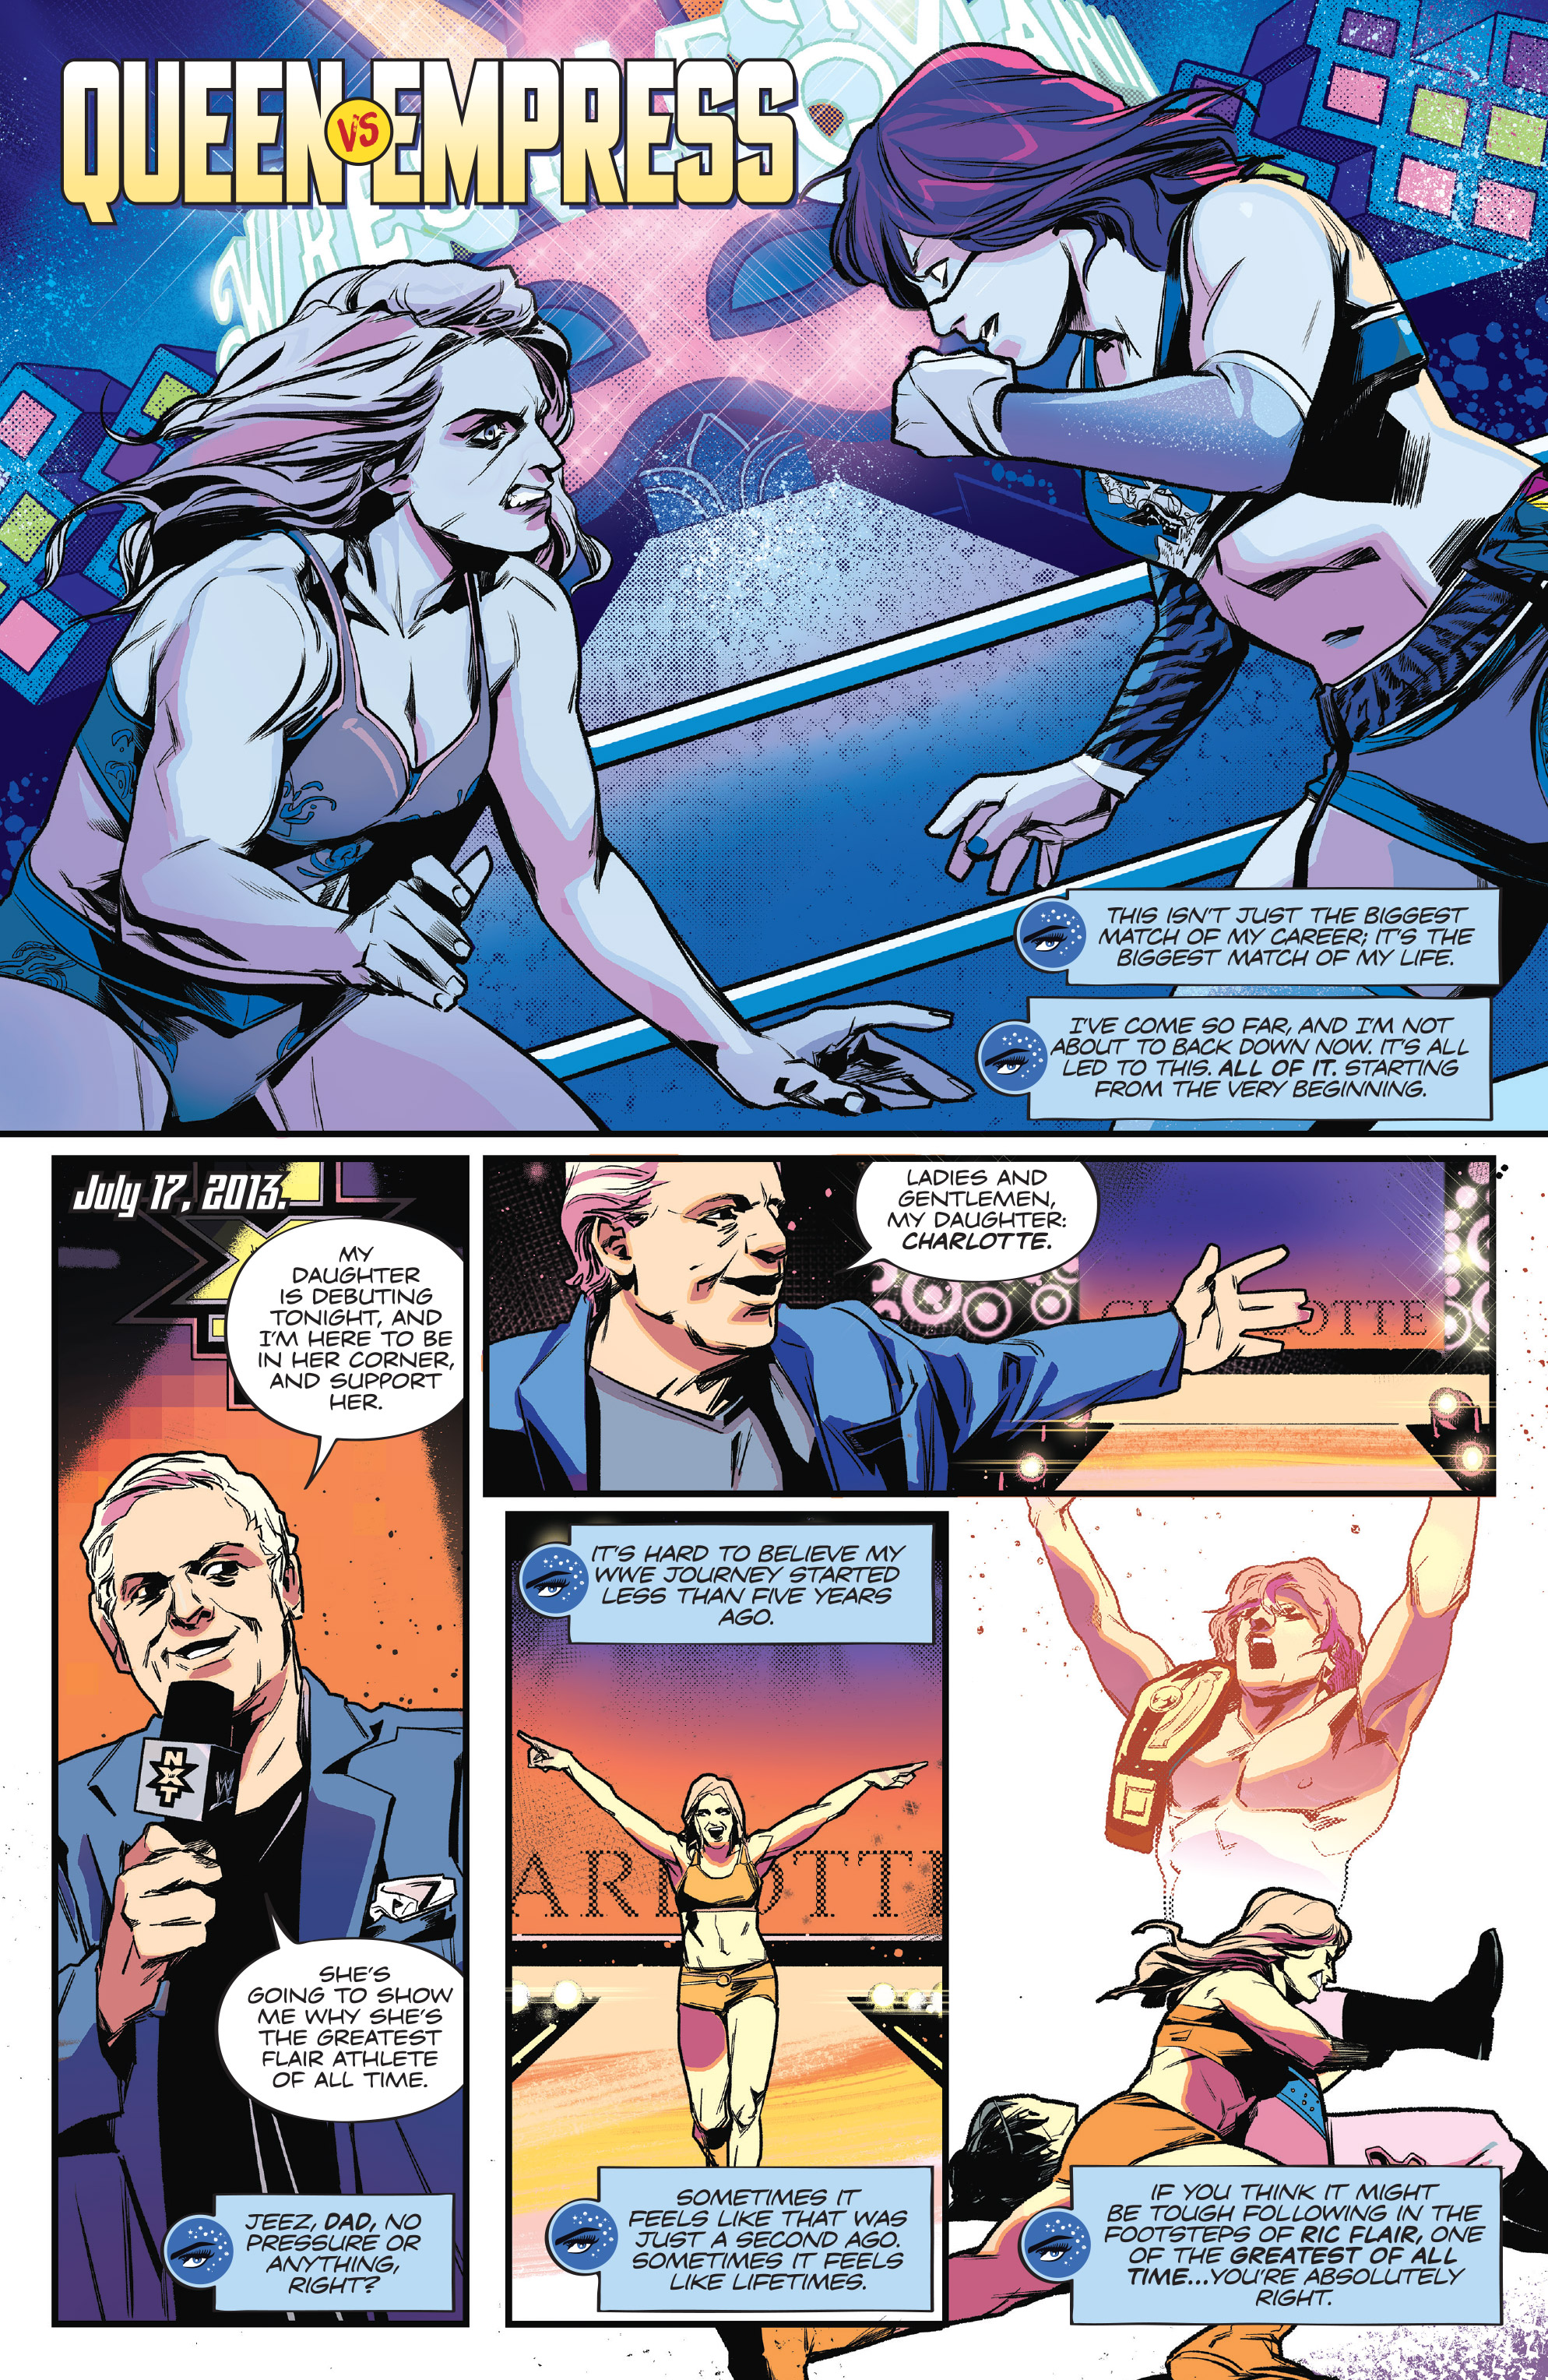 WWE Wrestlemania 2019 Special: Chapter 1 - Page 3